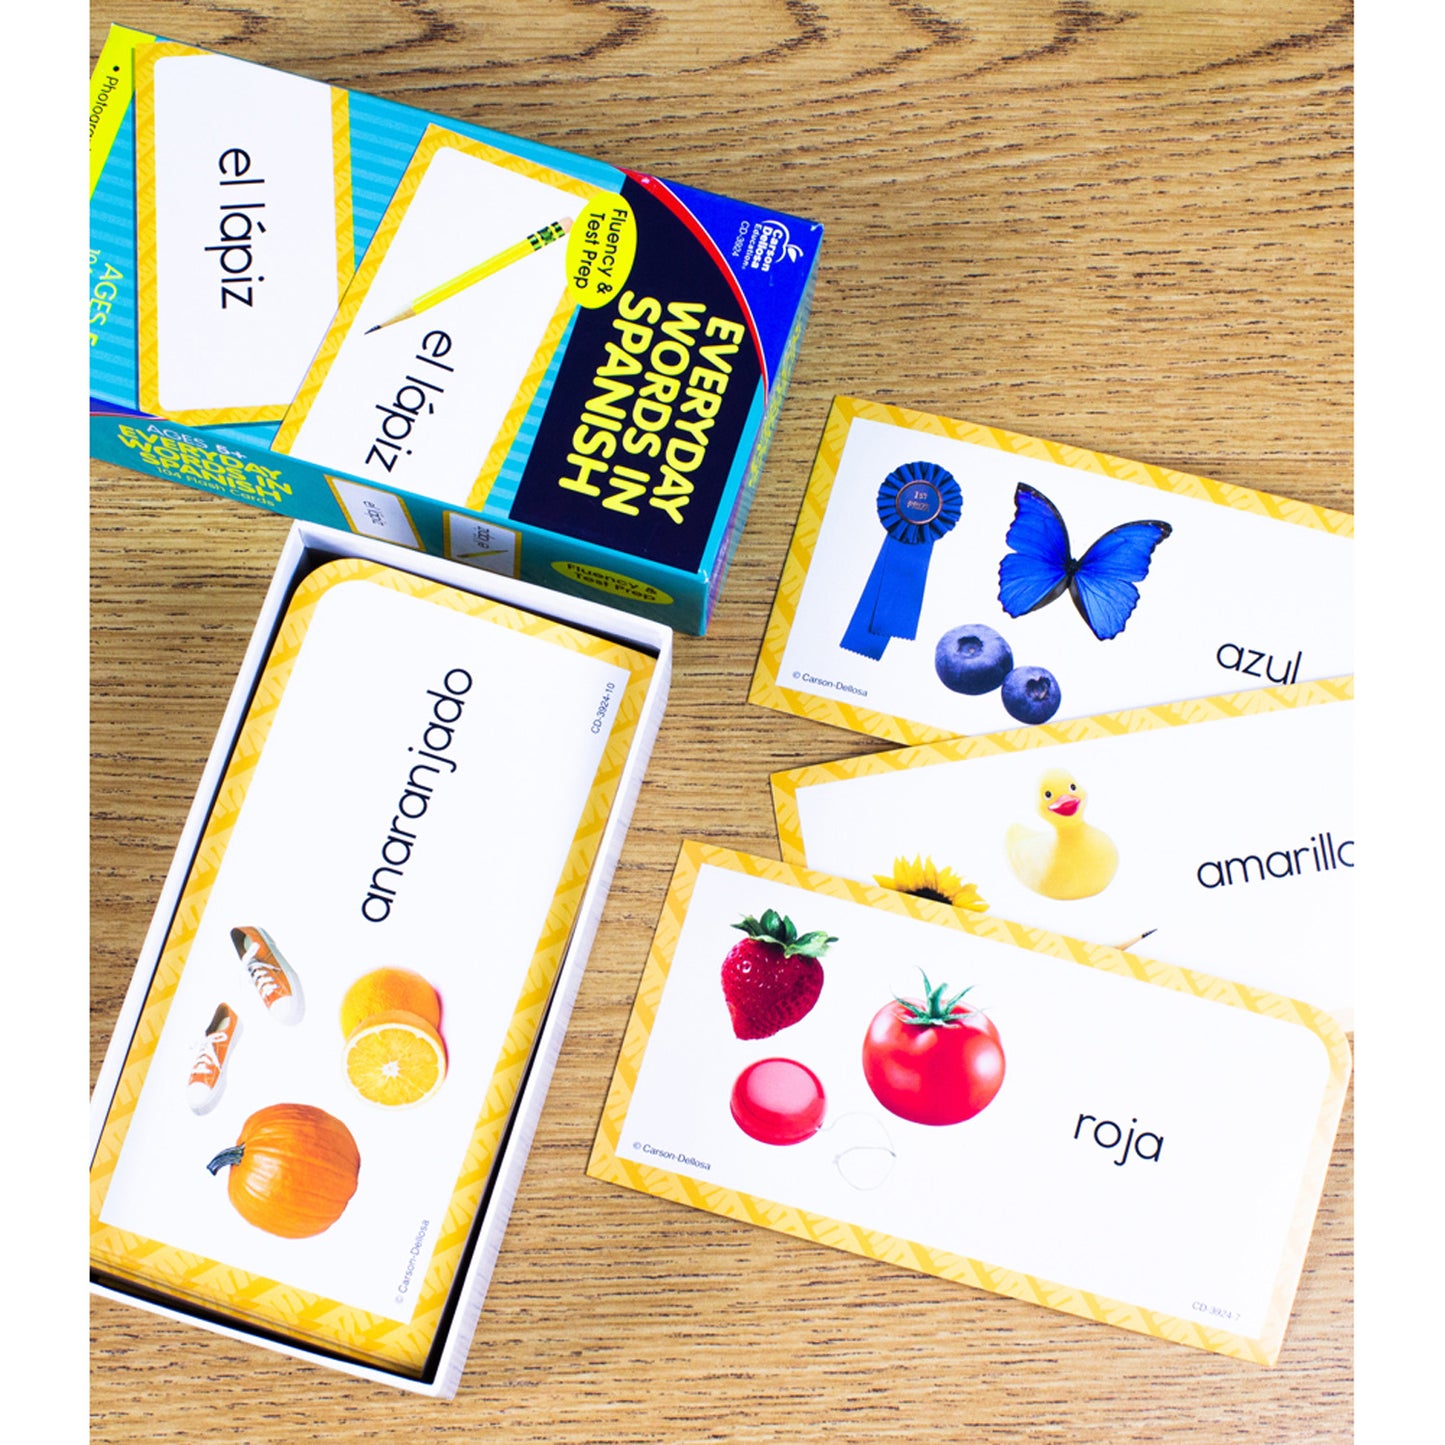 Everyday Words in Spanish: Photographic Flash Cards, Grade PK-8, 3 Packs